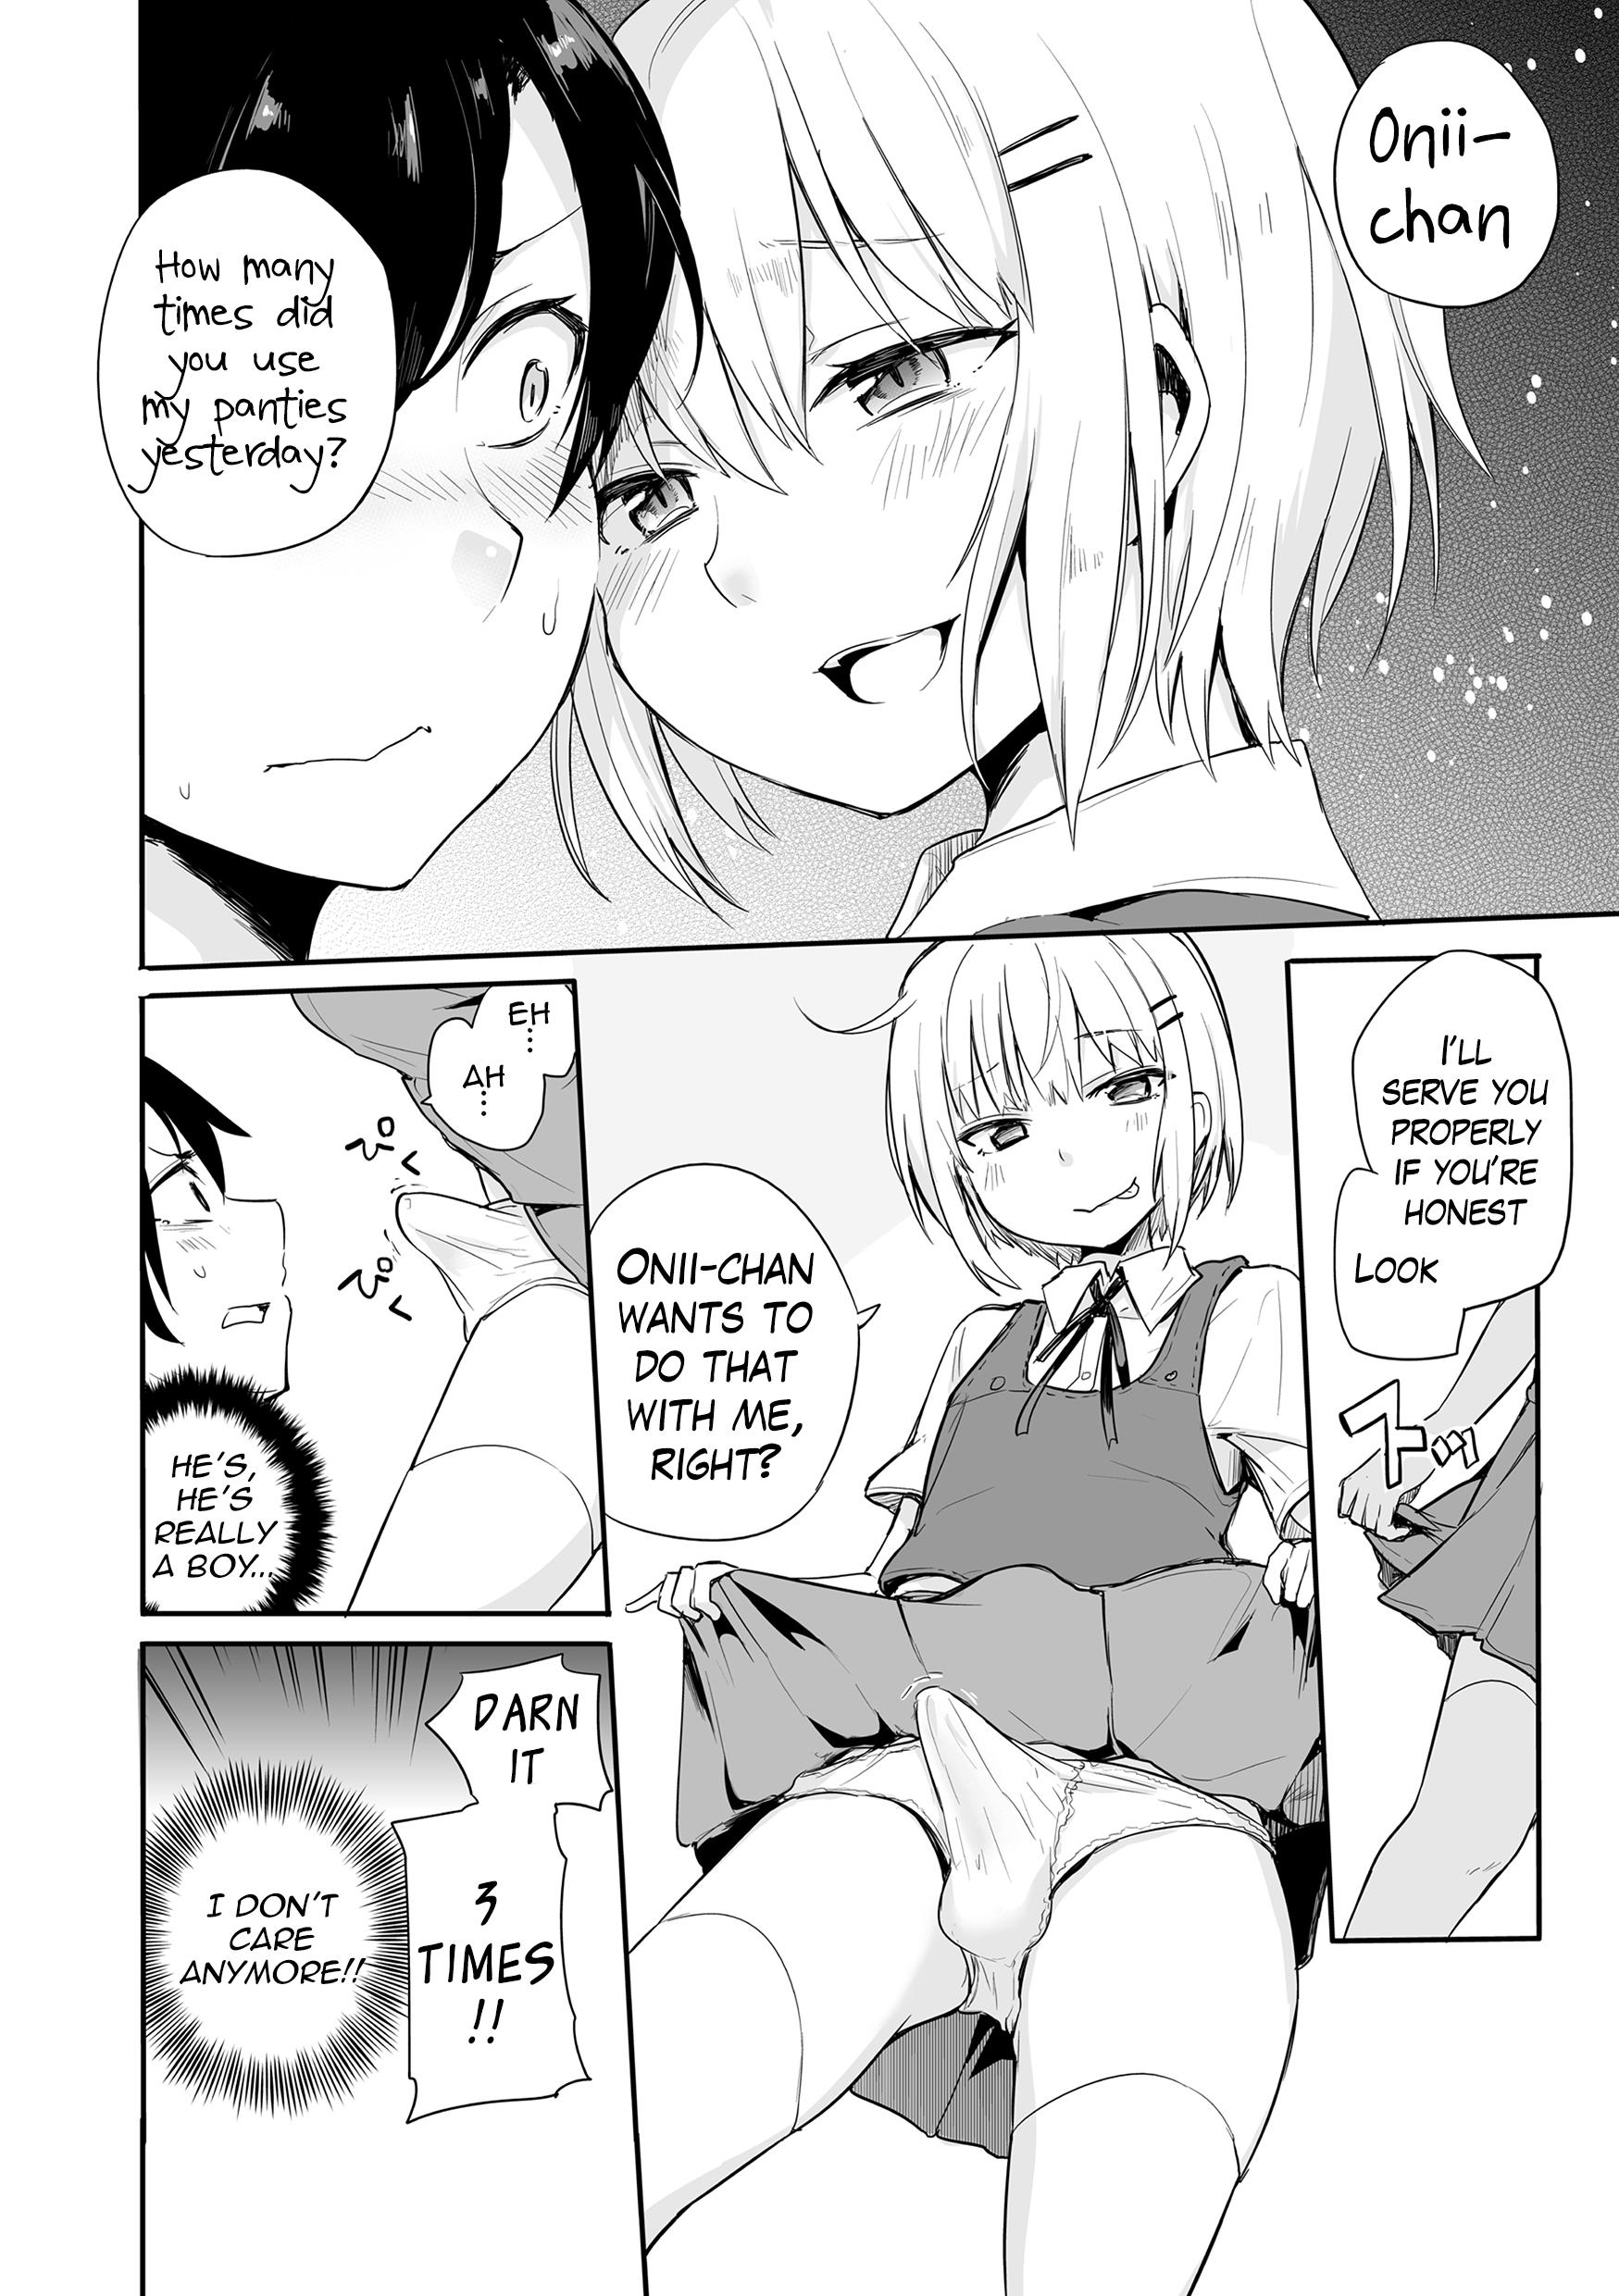 Black Kono Joukyou de Otouto Route ga nai no wa Okashii! | This Situation is too Weird for it not to be a Little Brother’s Route! Jockstrap - Page 7